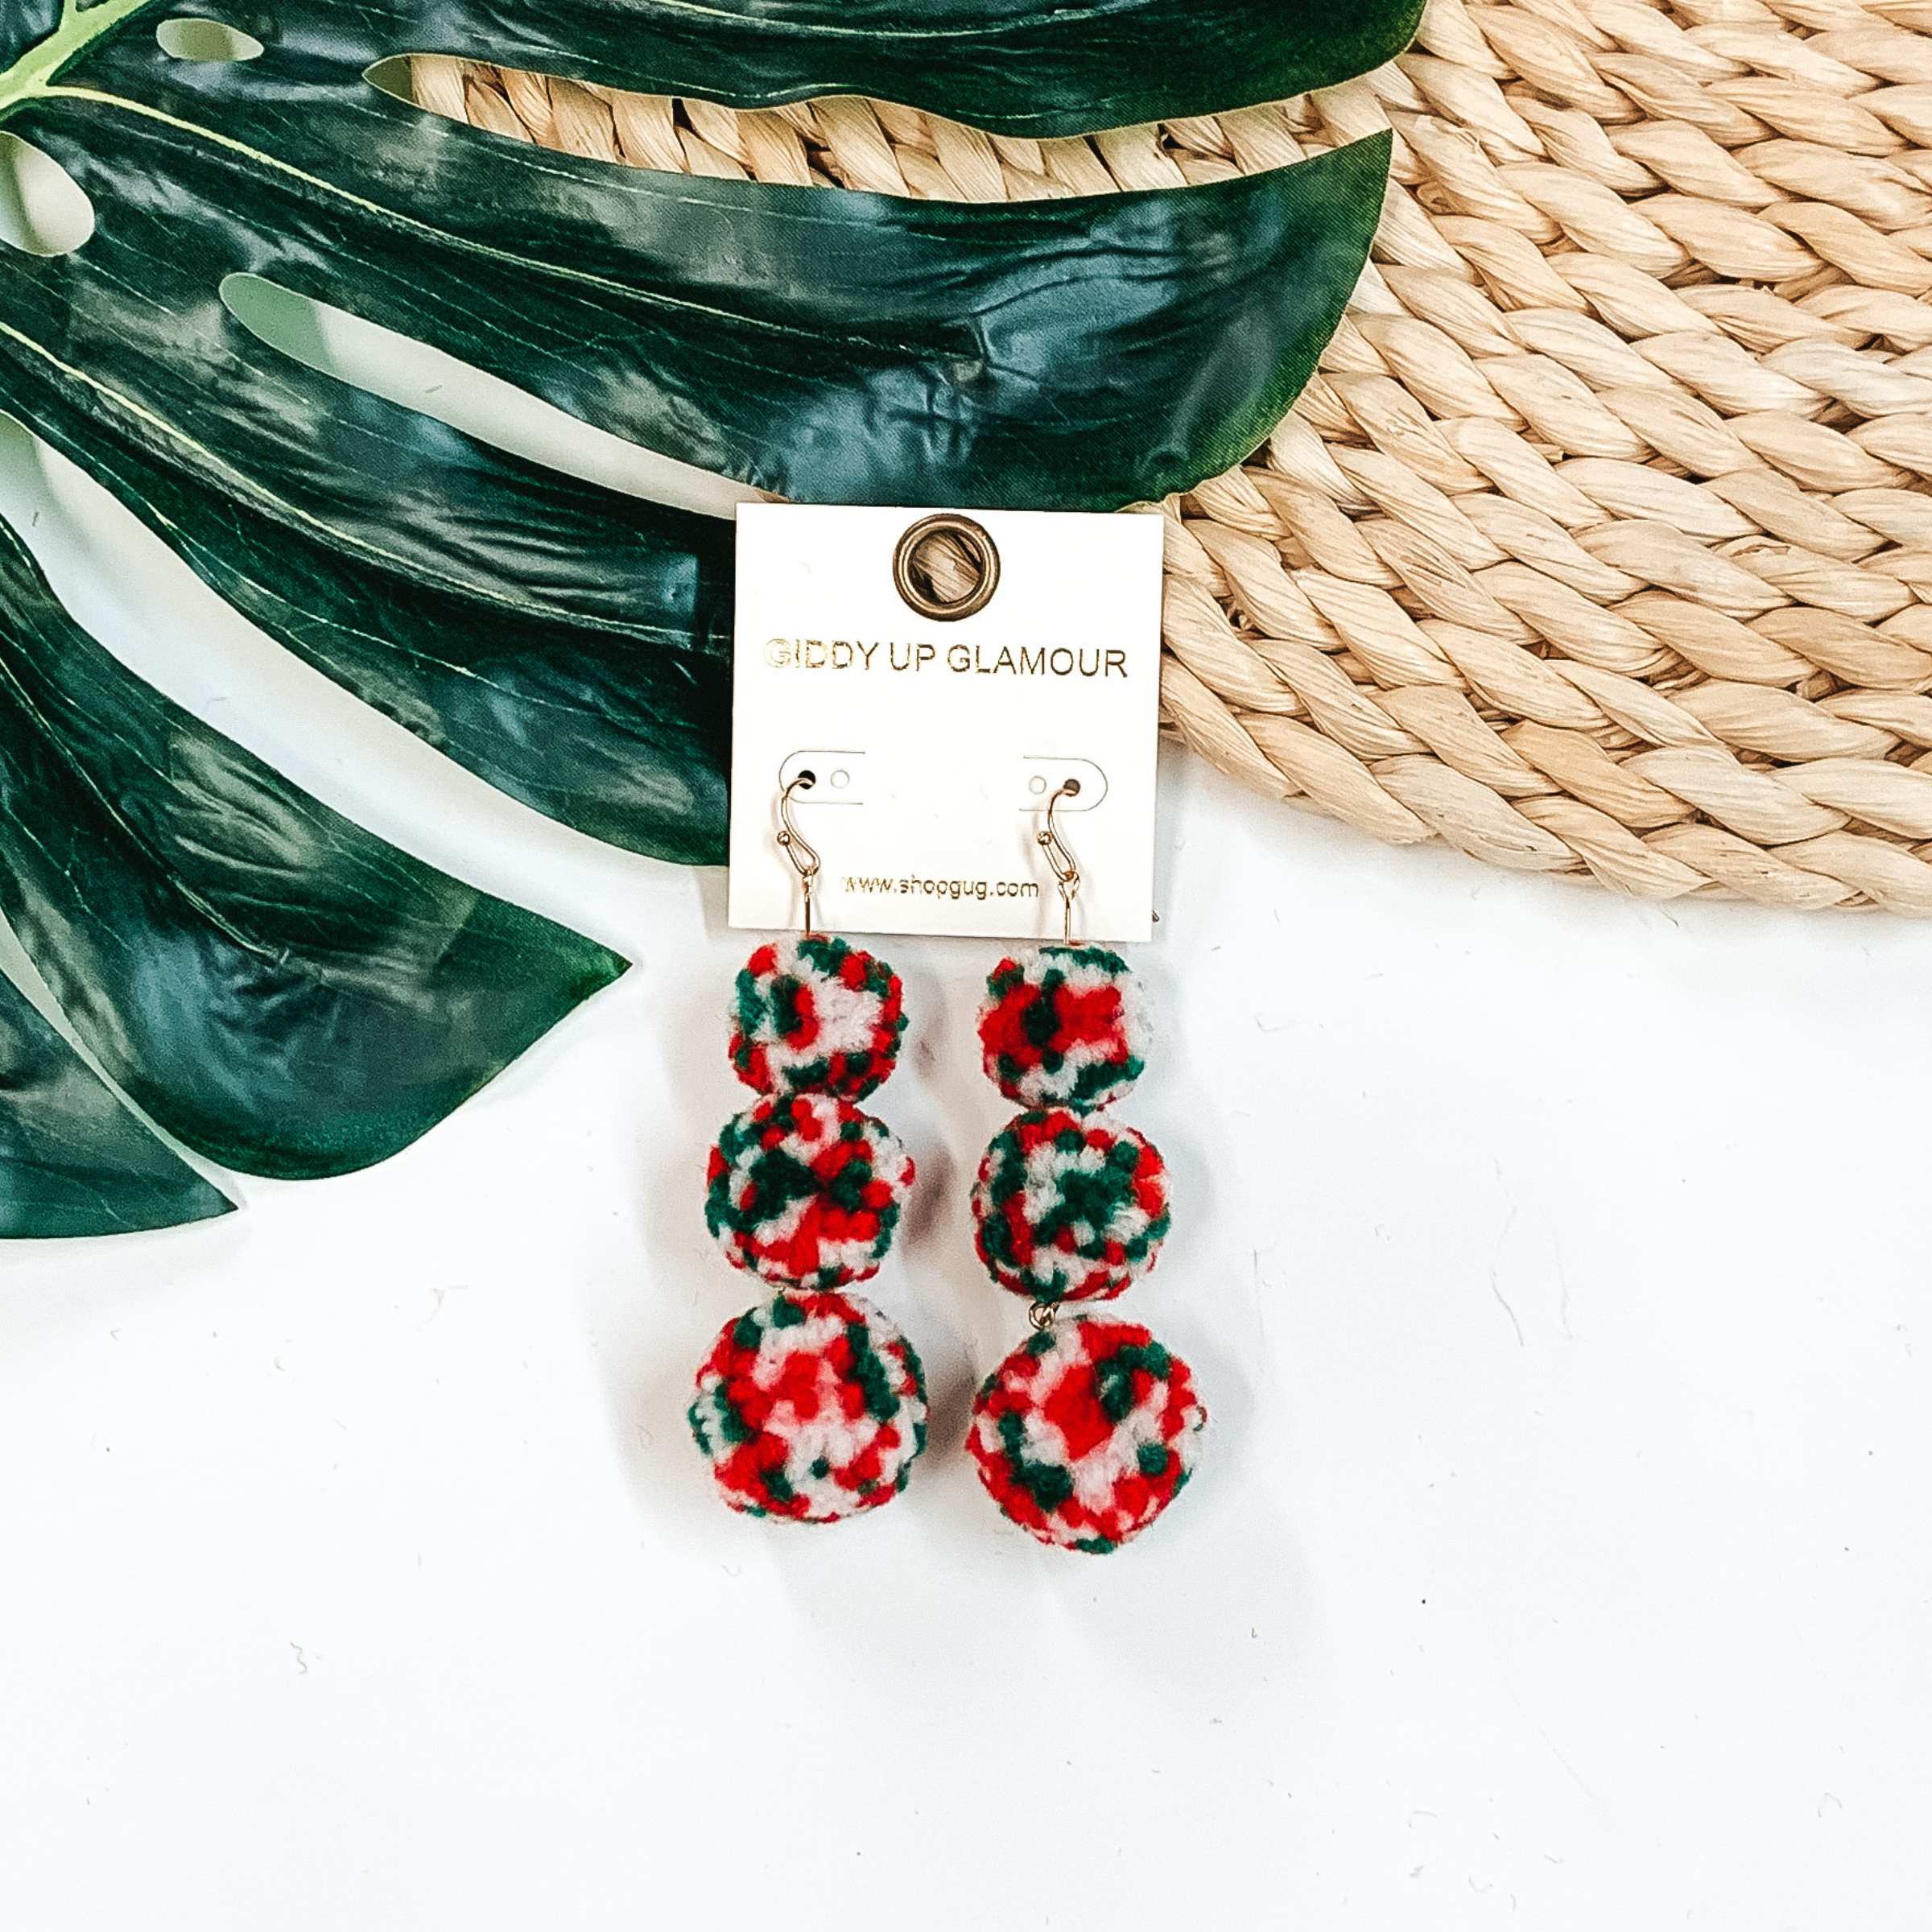 Three Tiered Pom Pom Dangle Earrings in Red/Green - Giddy Up Glamour Boutique